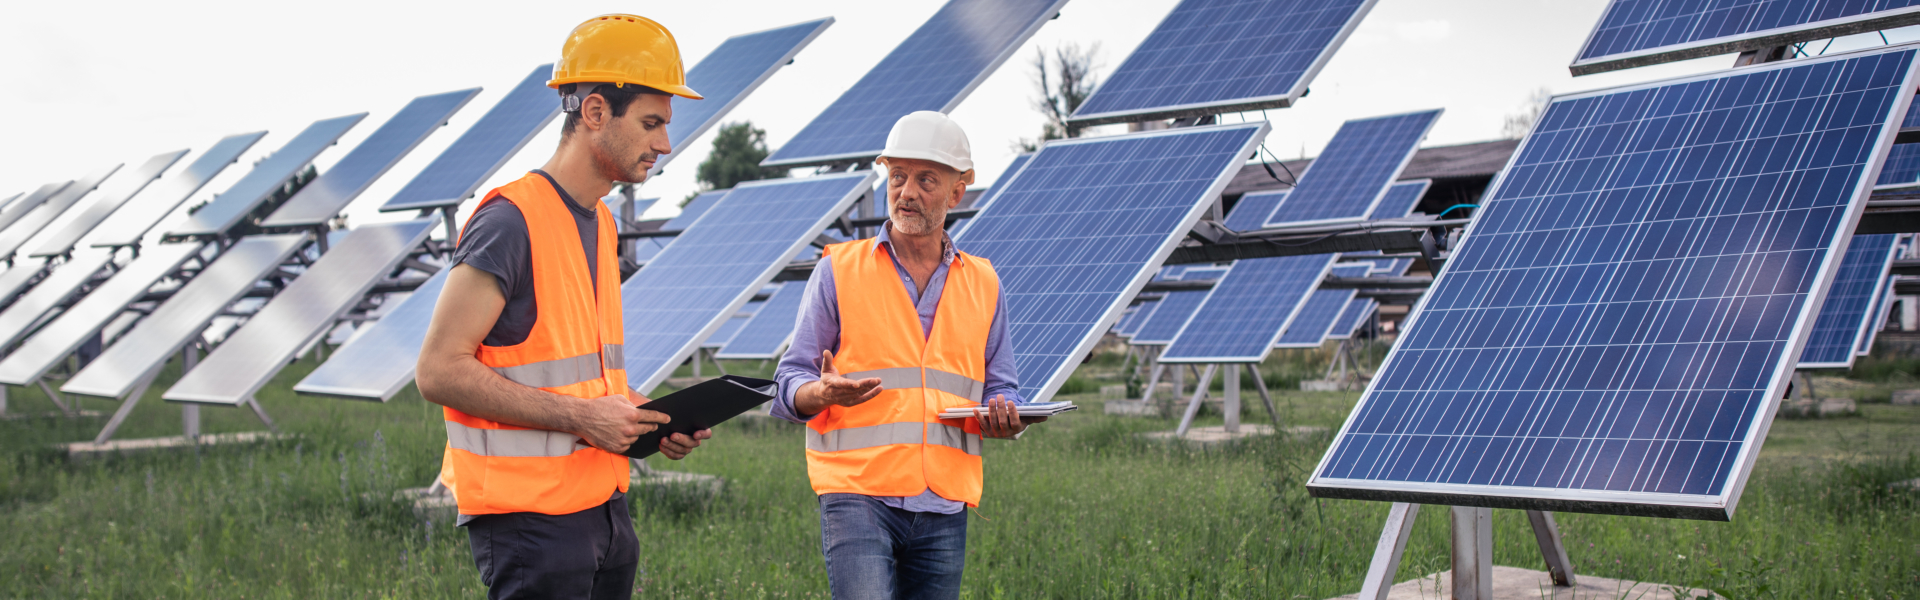 portrait of two adult male engineers wearing safety vest consulting with blue print in front of solar panels